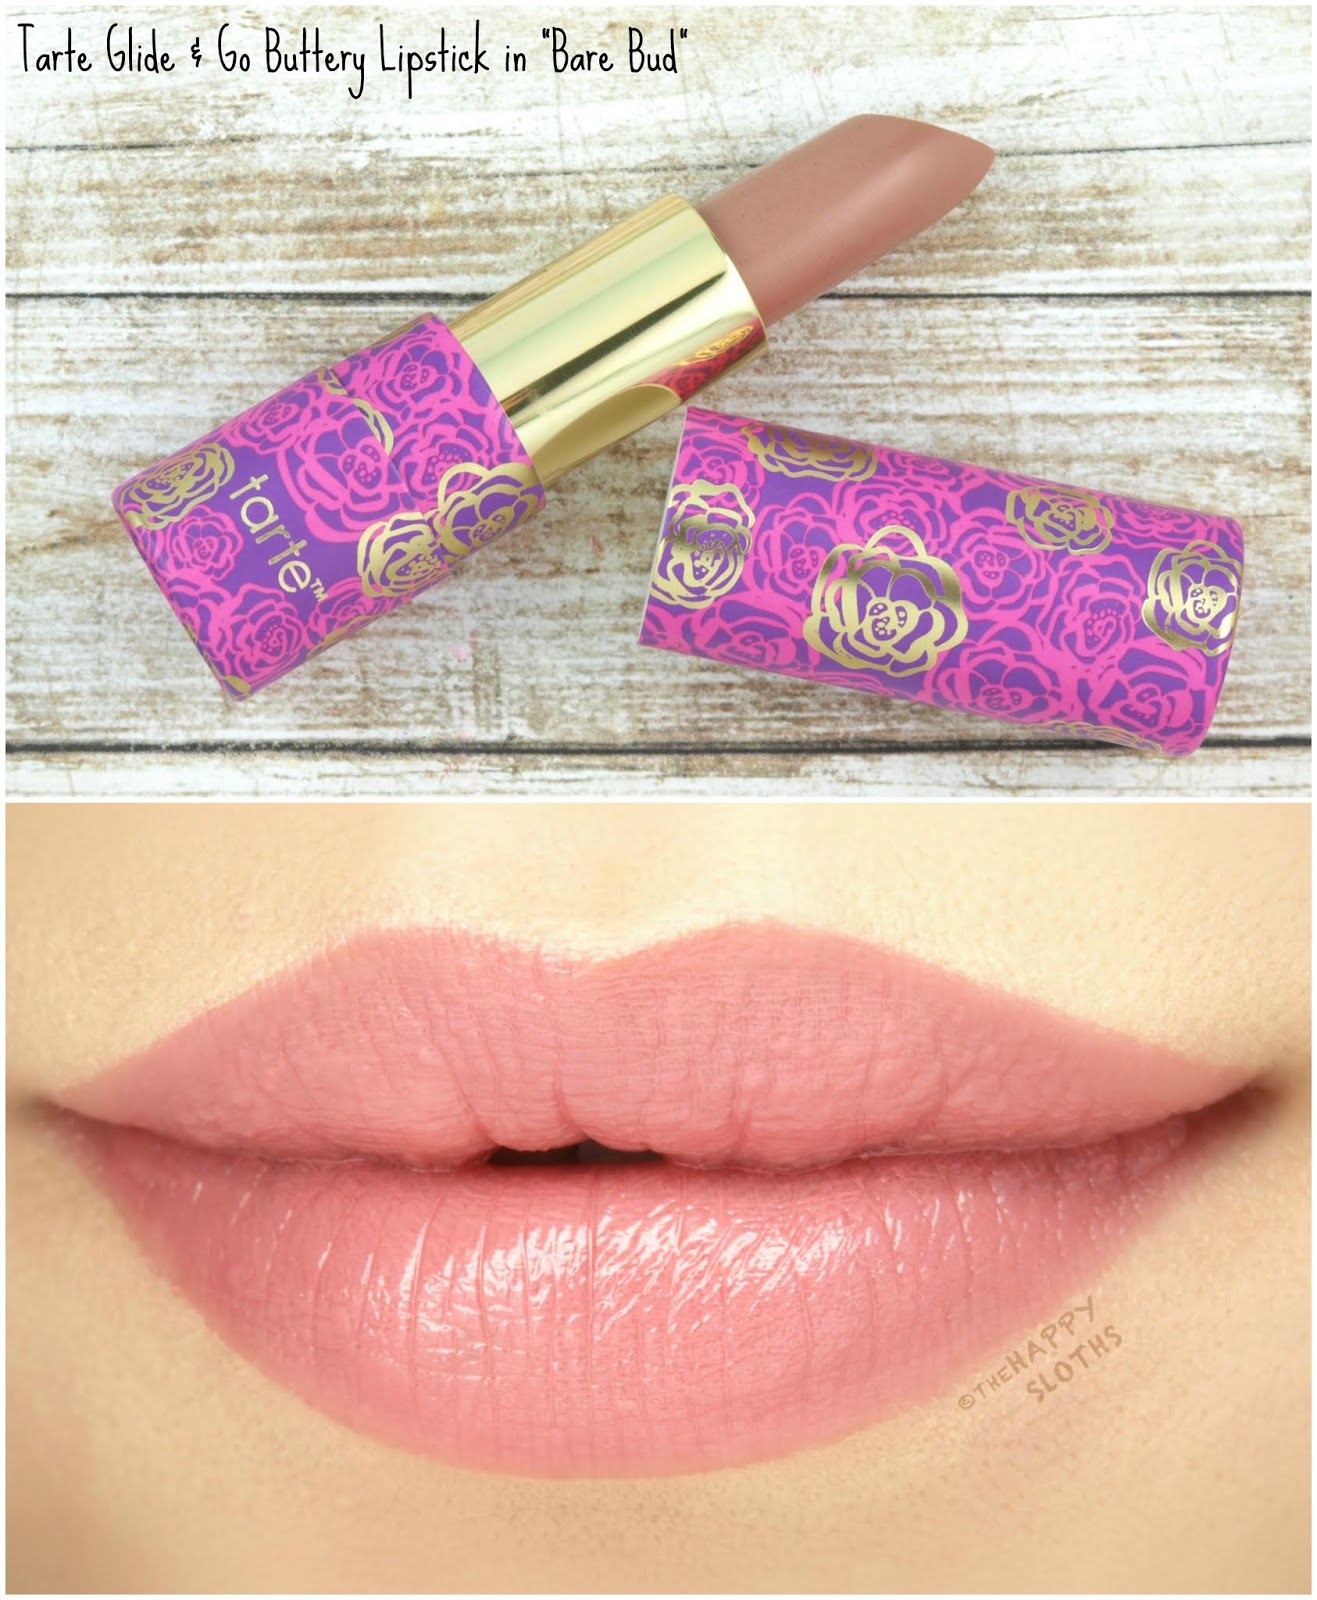 Tarte | Double Duty Beauty Glide & Go Buttery Lipstick in "Bare Bud": Review and Swatches